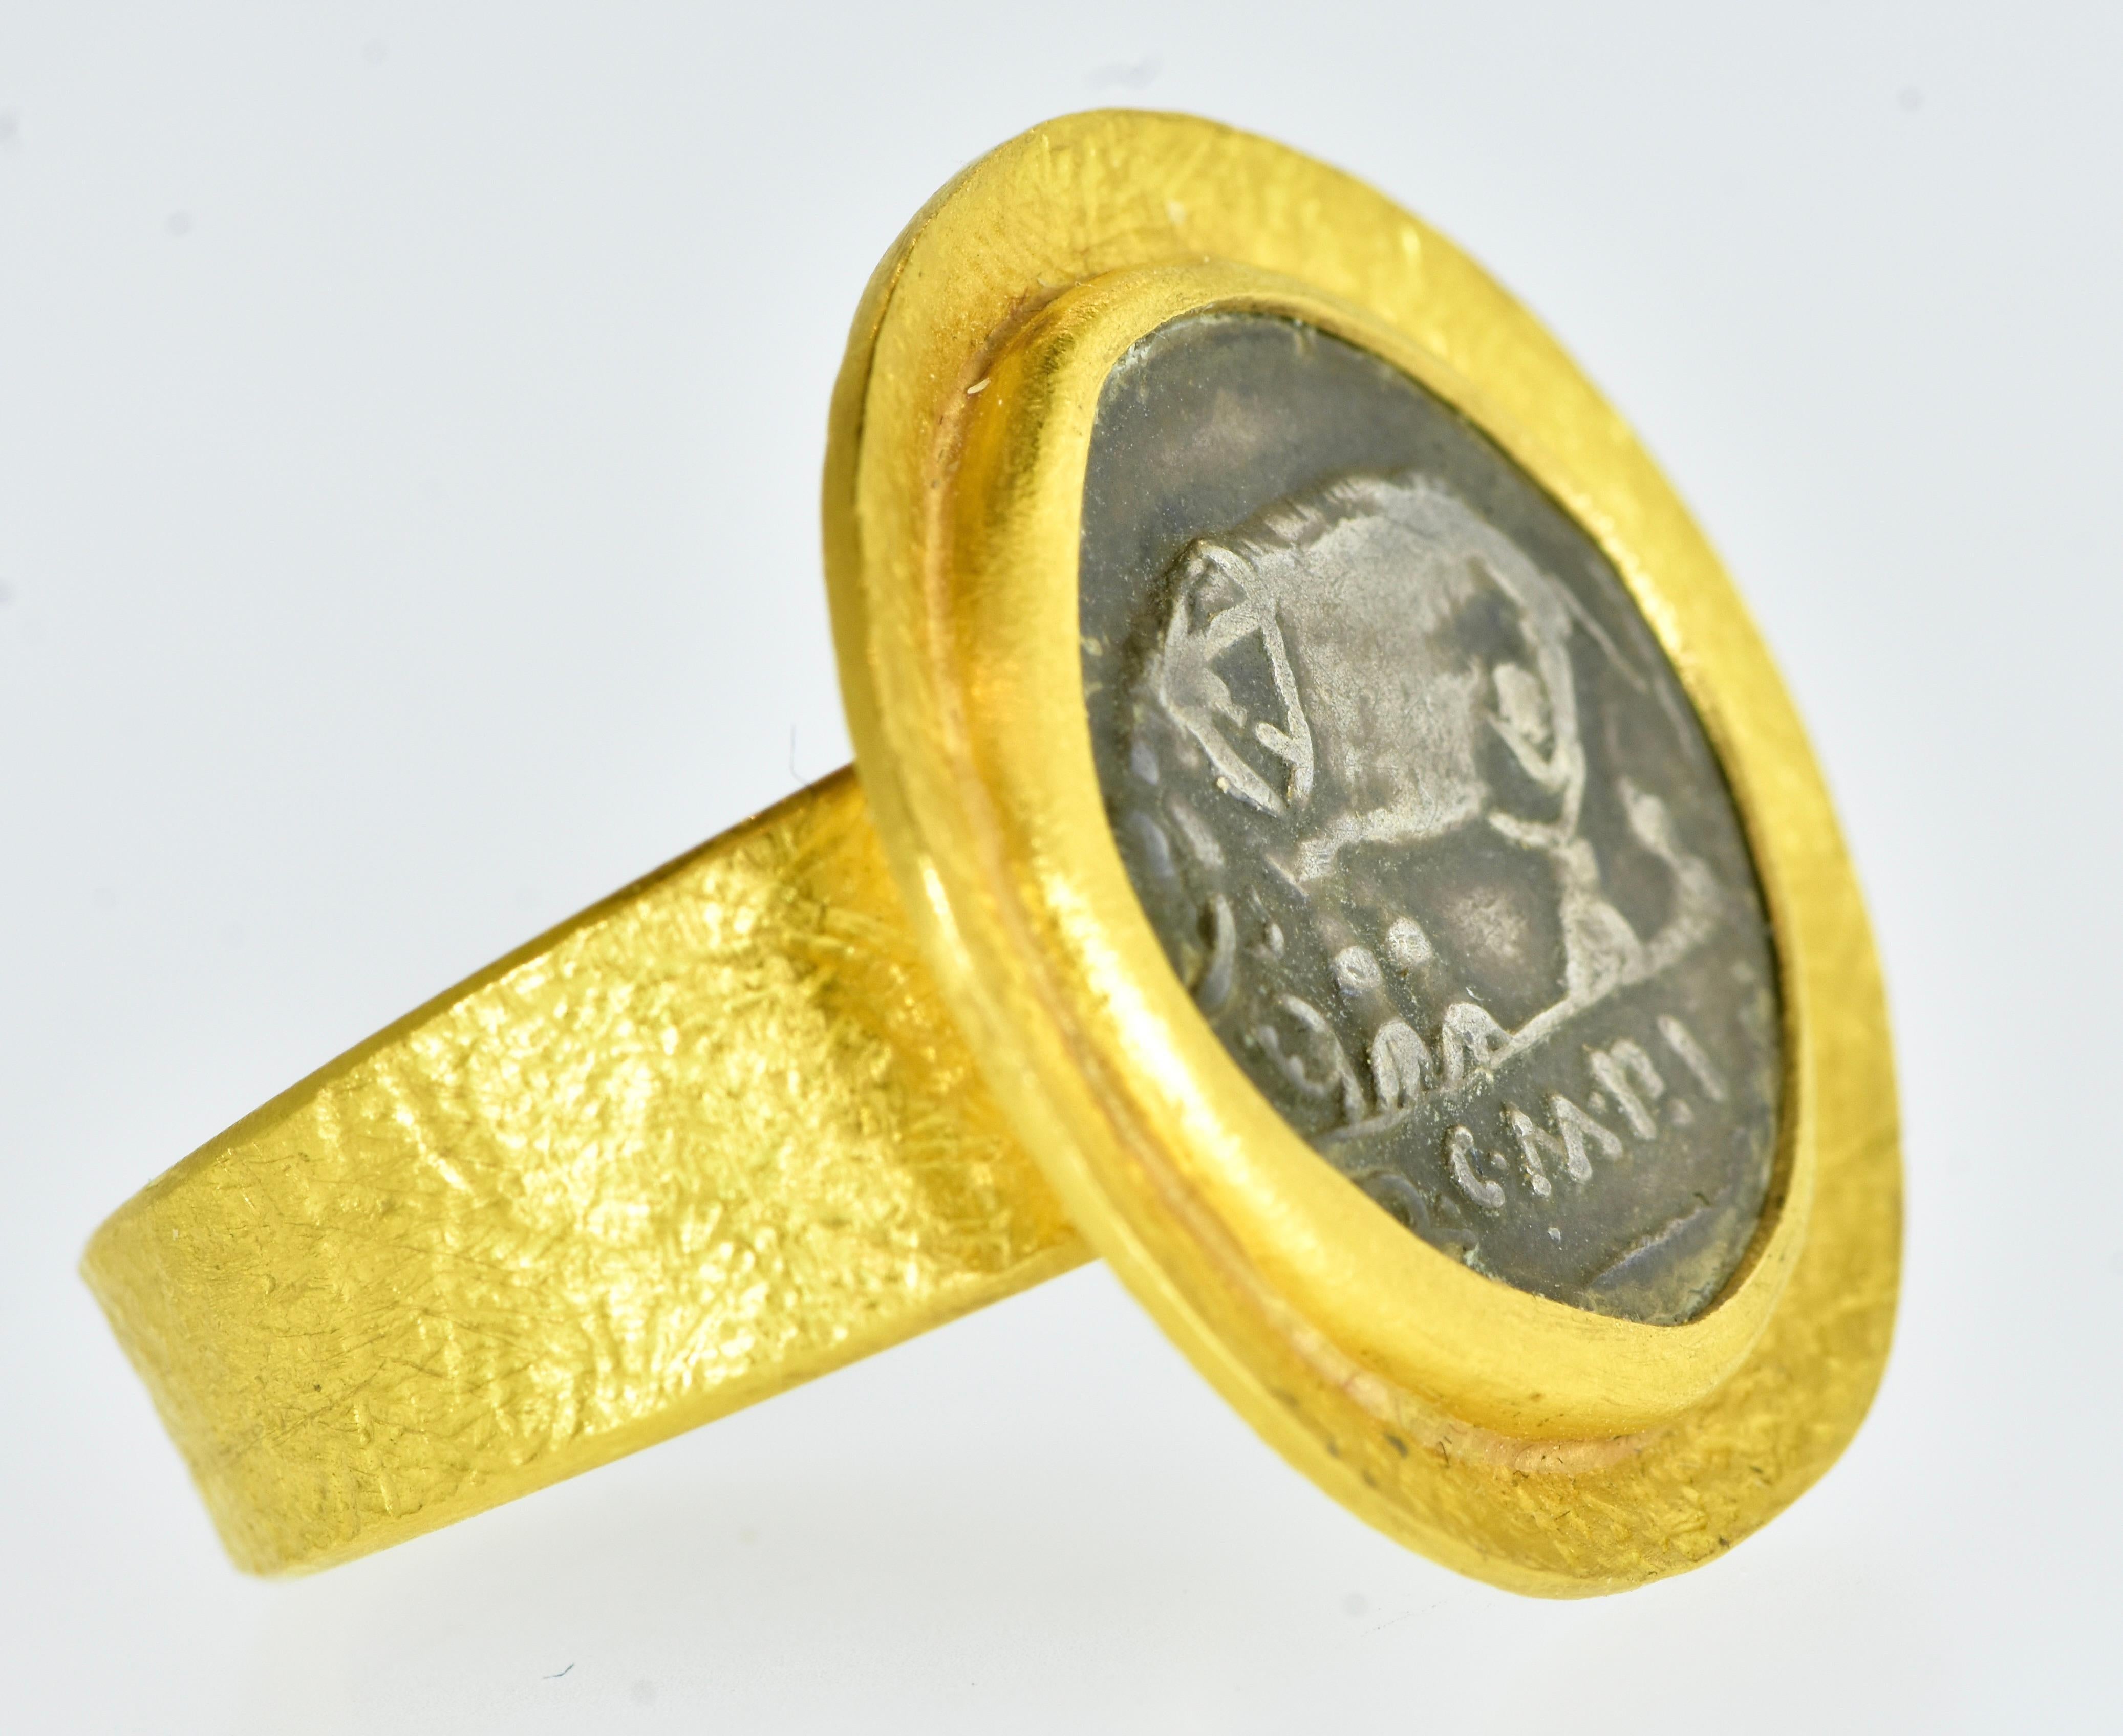 22K gold Ring centering a fine Ancient Roman Coin, Fairchild & Co. For Sale 2